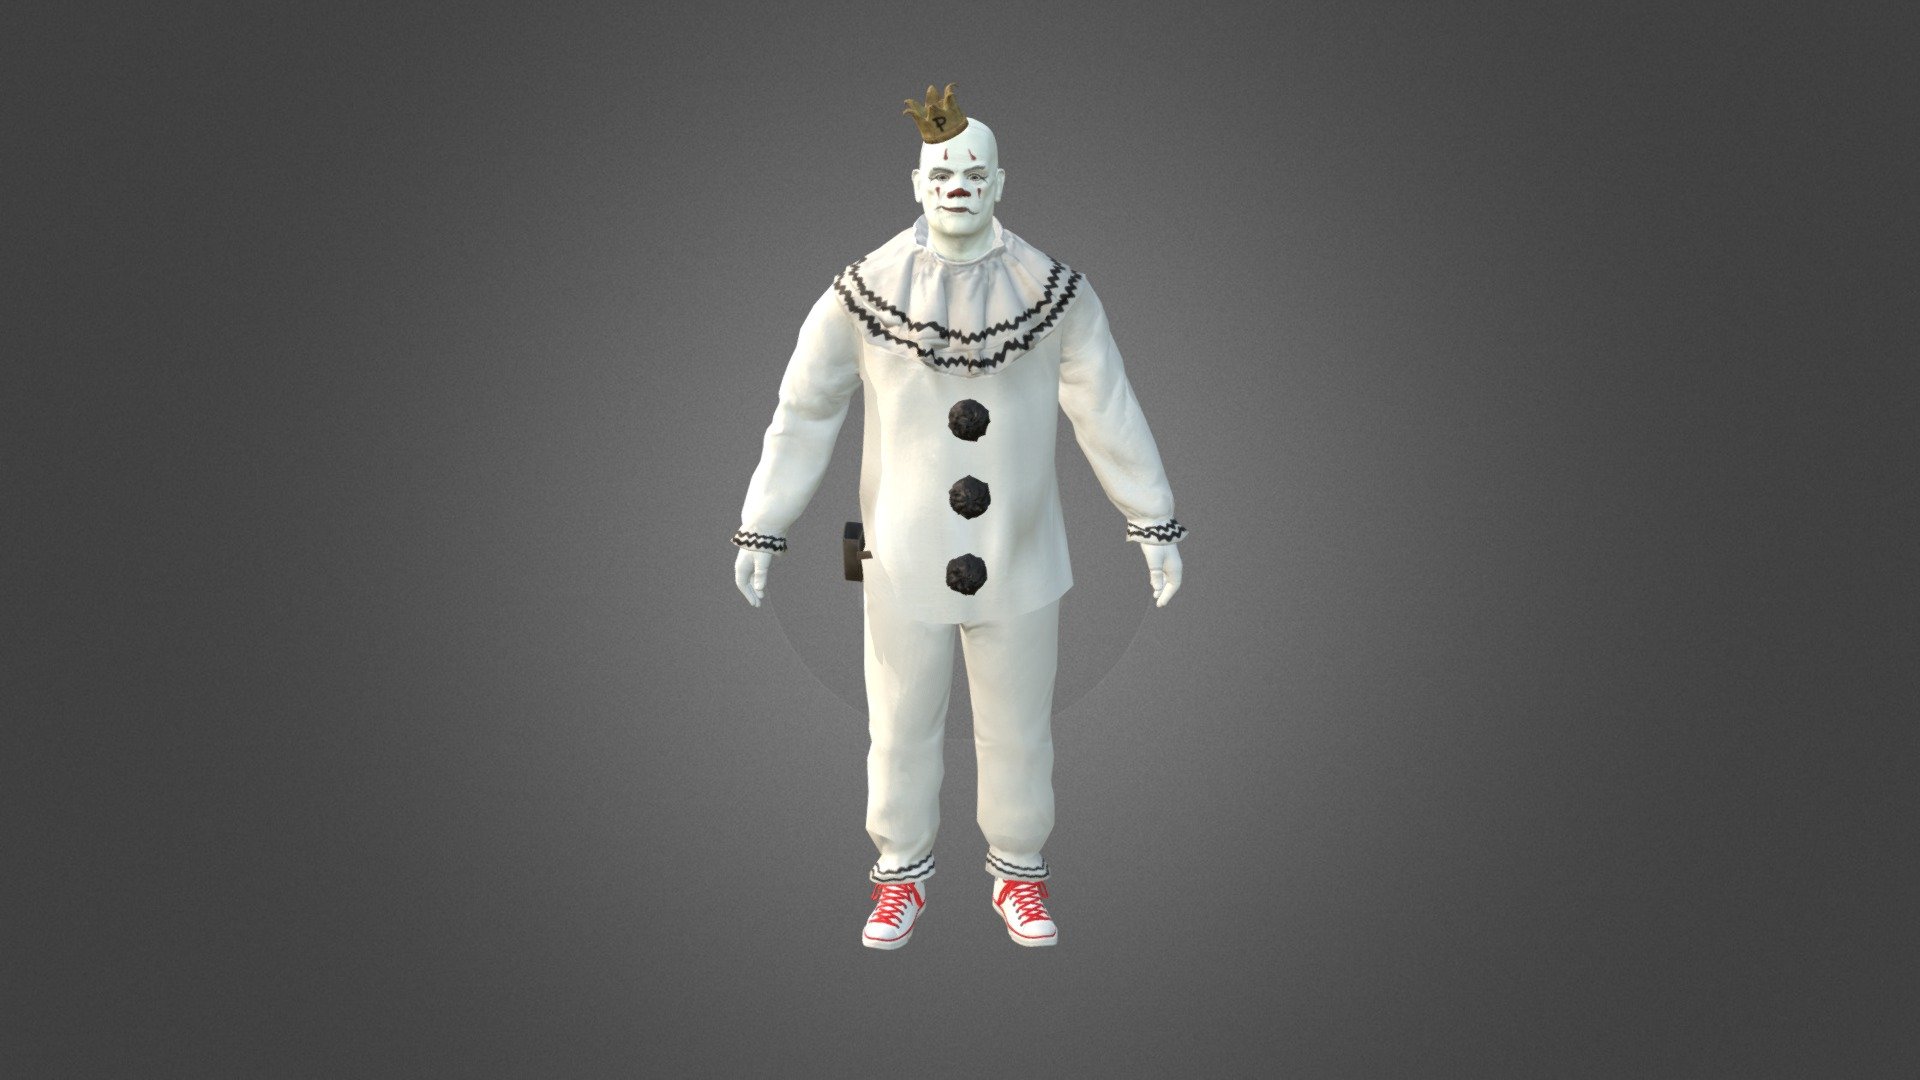 Puddles, the sad Clown with the golden Voice

Special thanks go to P3nT4gR4m for the head model of Puddles Pity Party 
[https://sketchfab.com/models/74354d99091345f3beca8d471d9f1435] - Puddles Pity Party - Download Free 3D model by floh 3d model